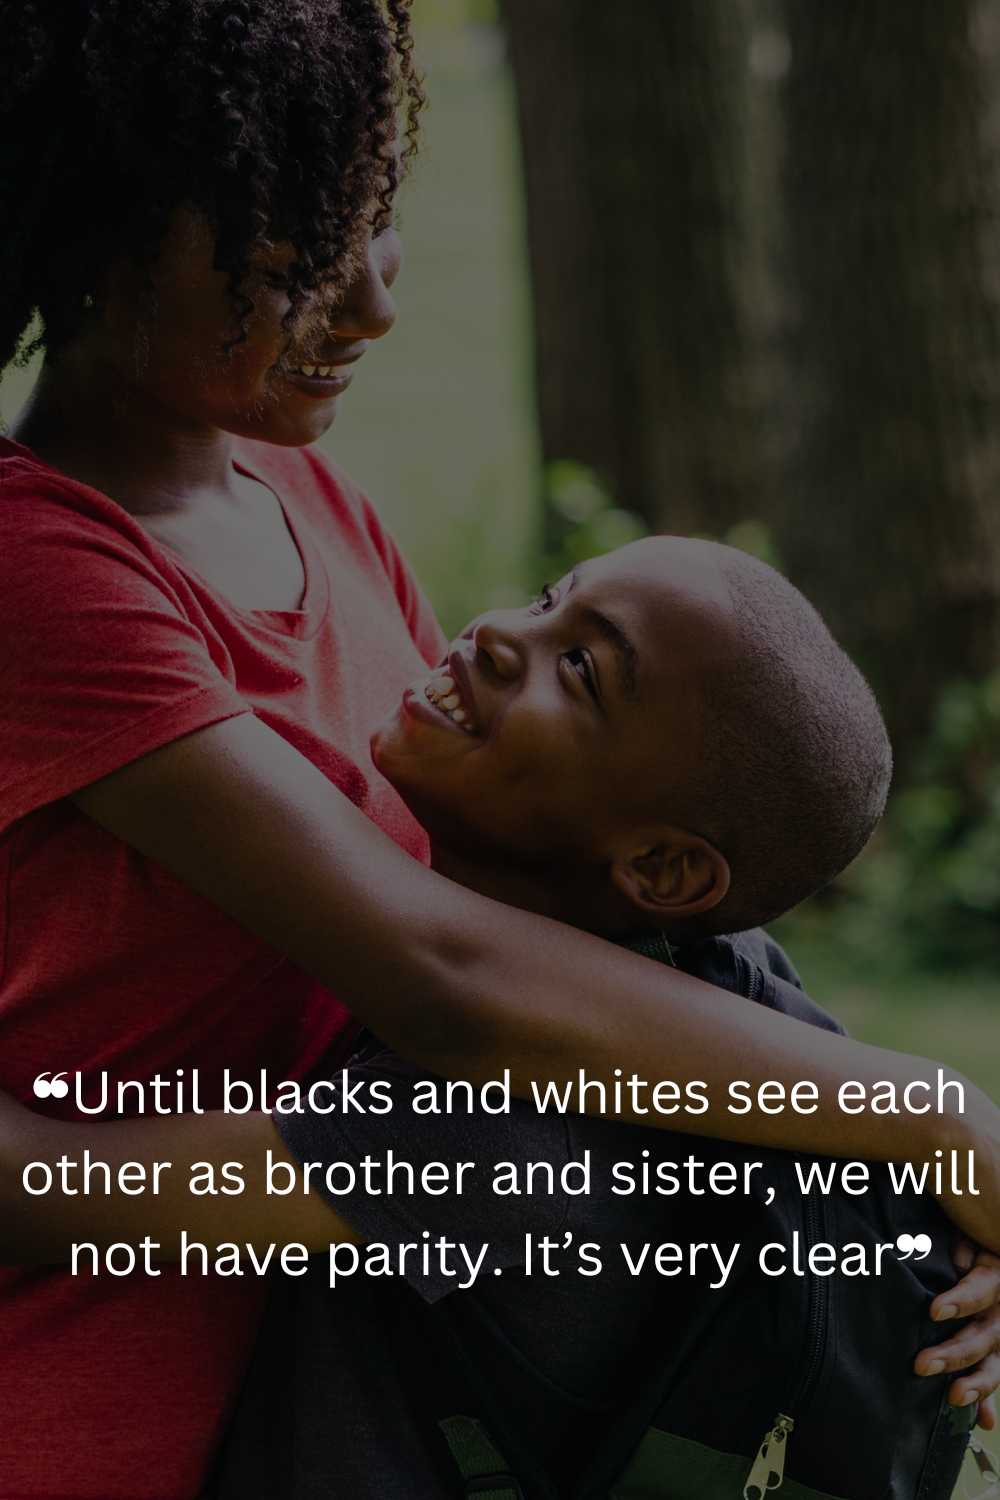 ❝Until blacks and whites see each other as brother and sister, we will not have parity. It’s very clear❞